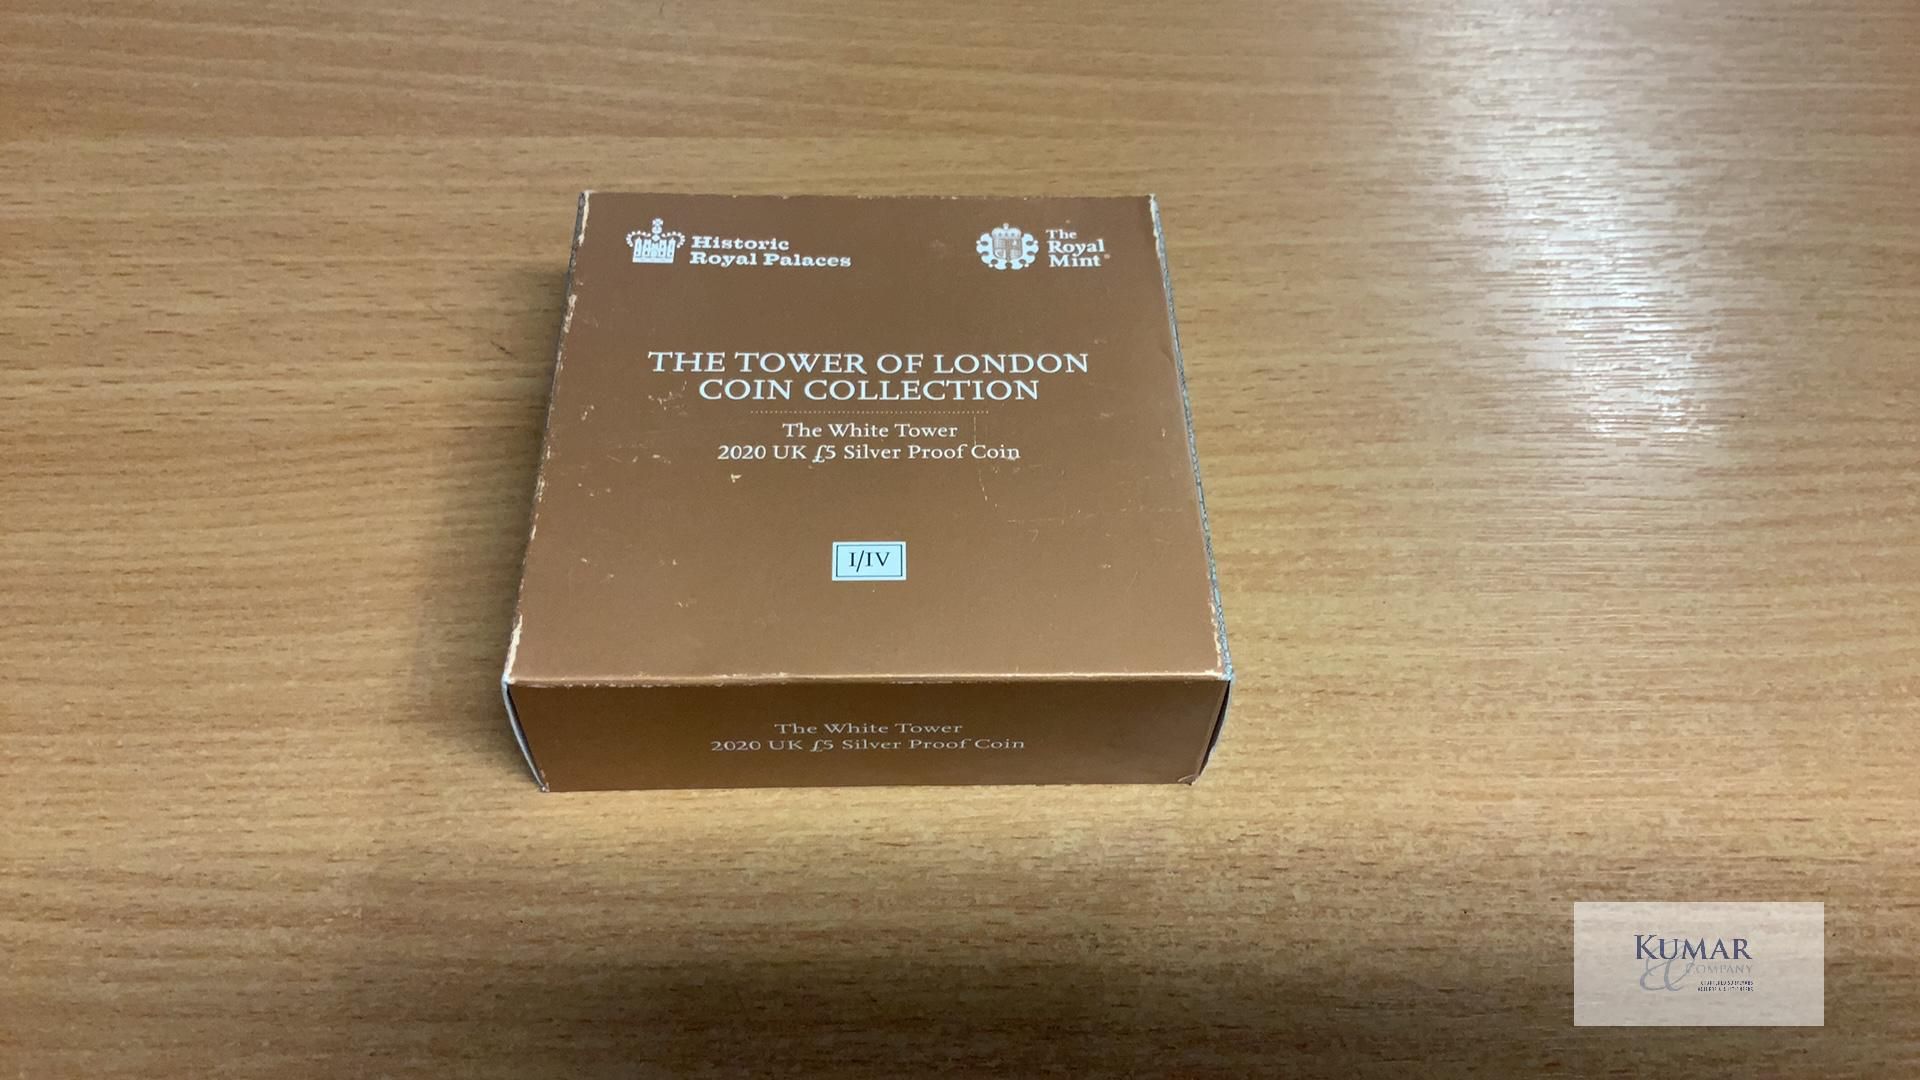 The Royal Mint Collection- The Tower of London Coin Collection. The White Tower 2020 UK £5 Silver